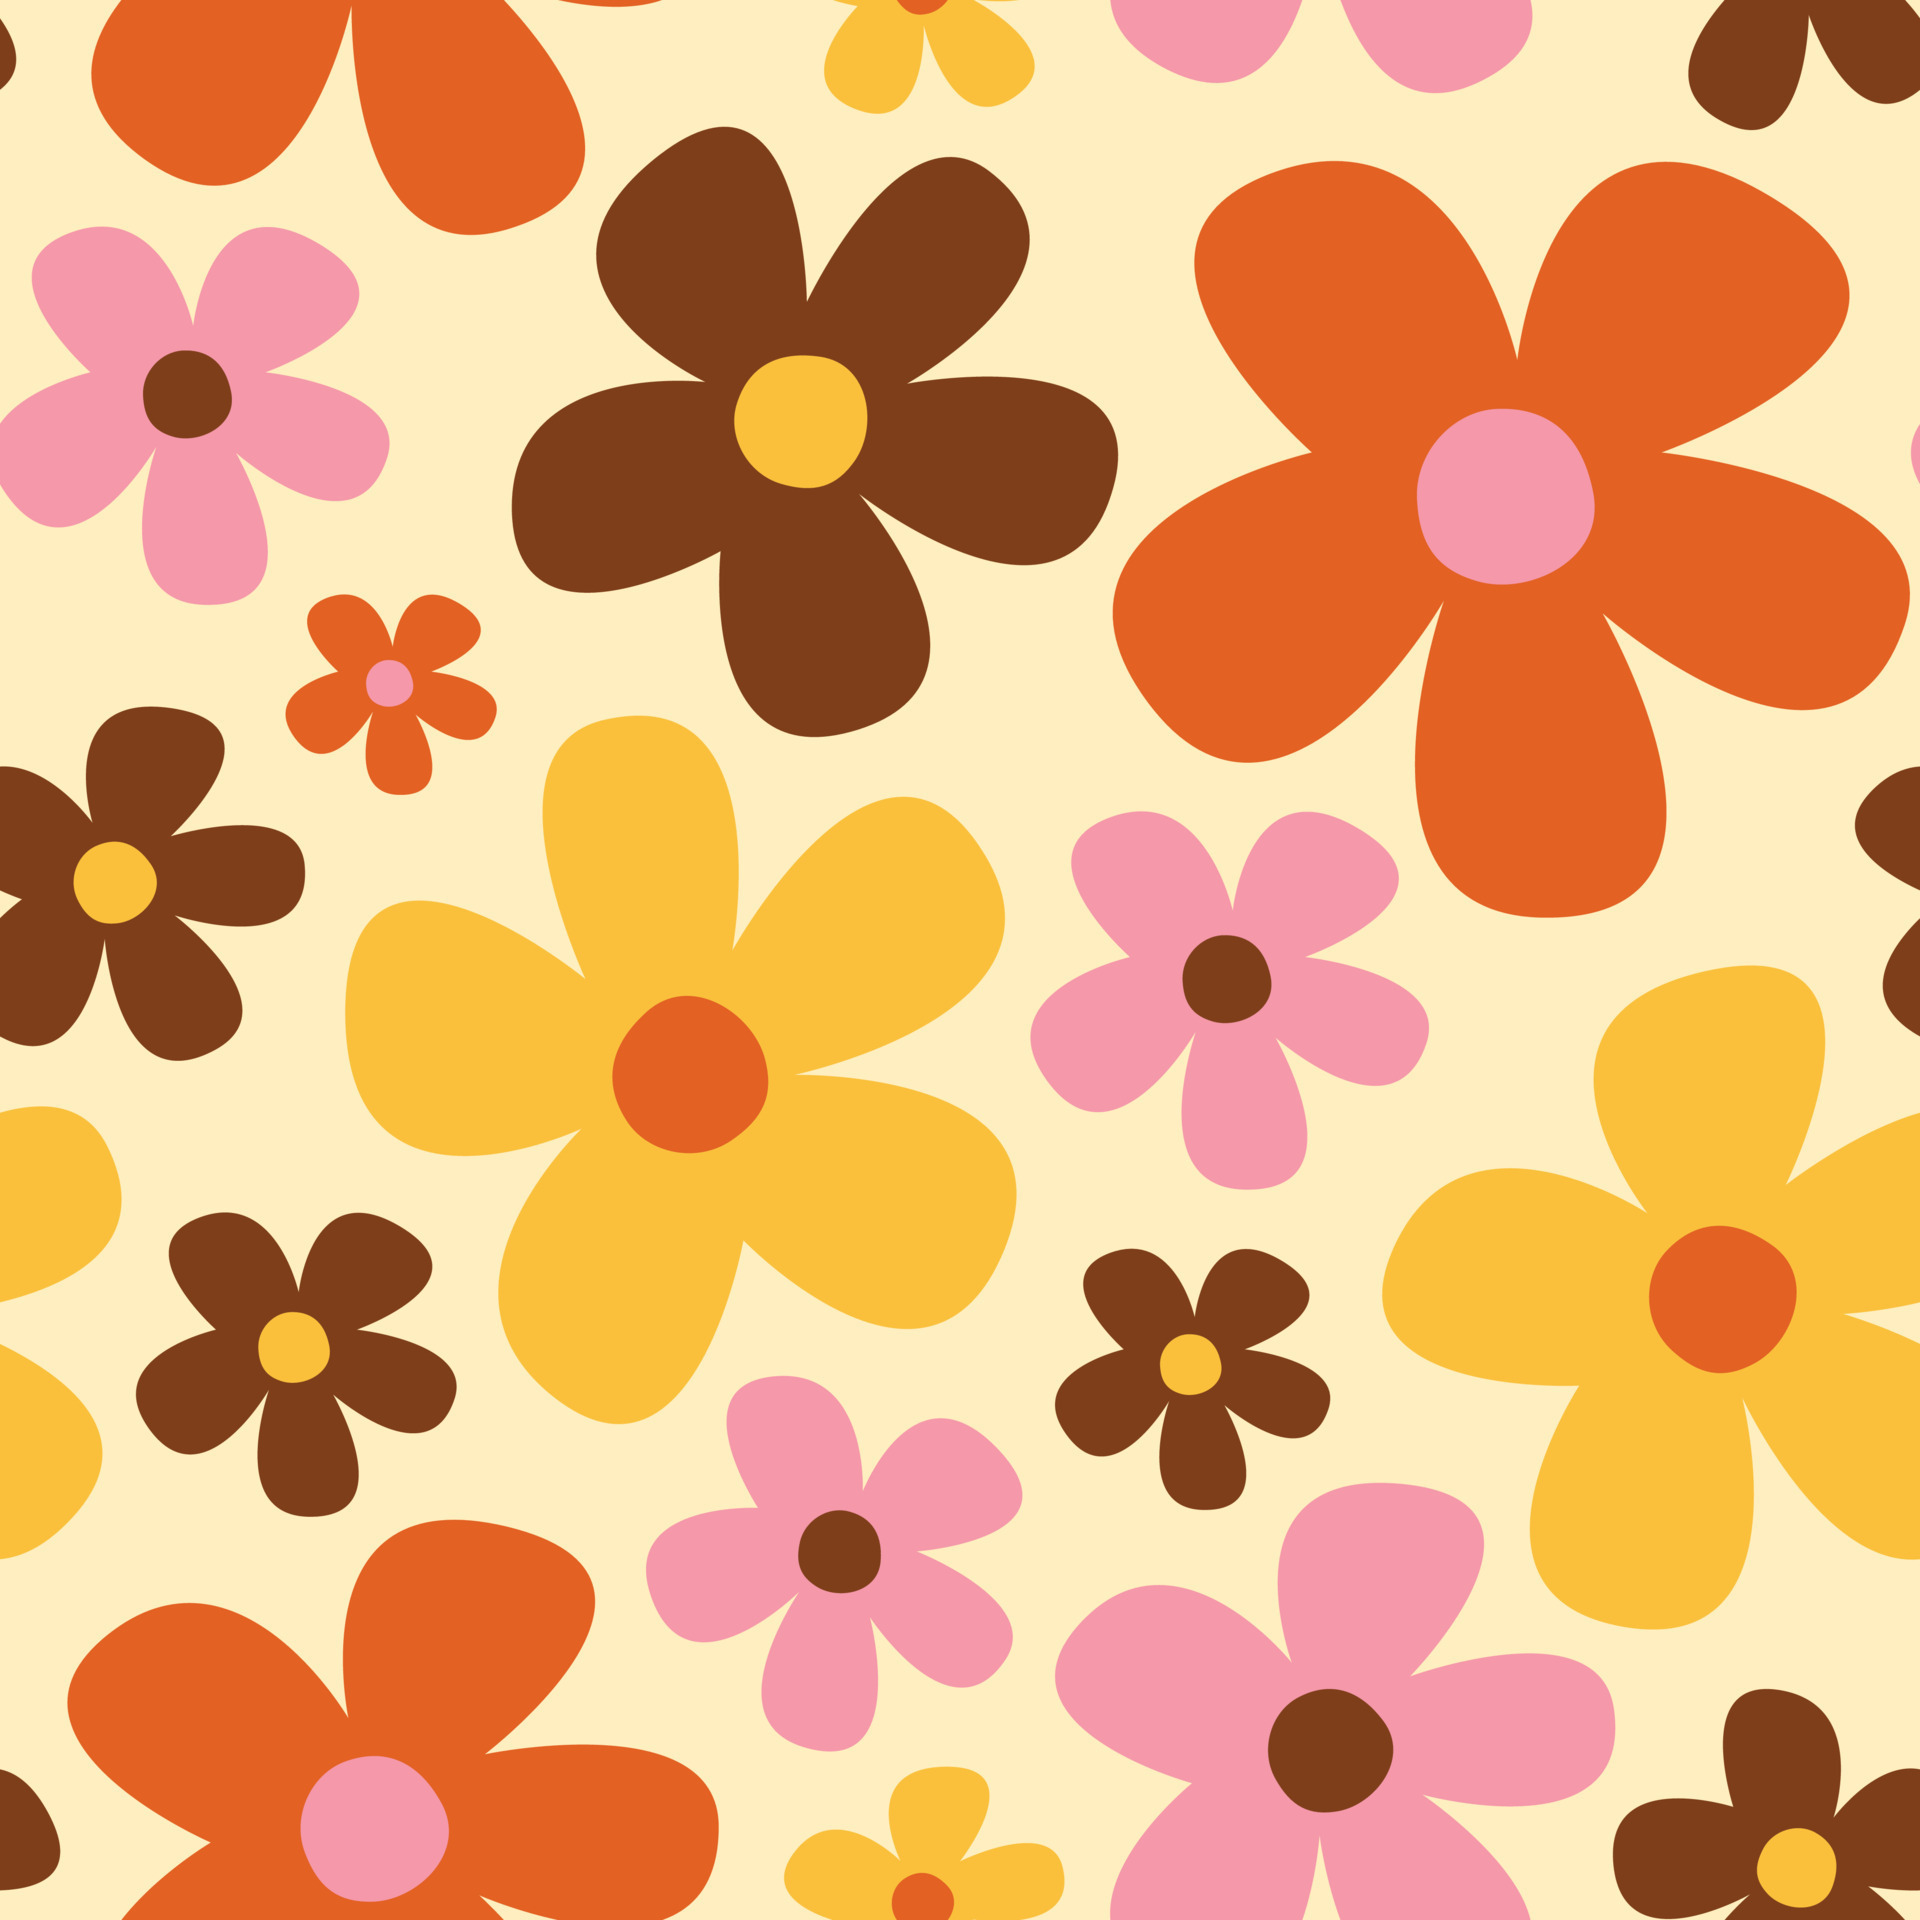 Cute vector seamless pattern with pink, orange and brown daisy flowers ...